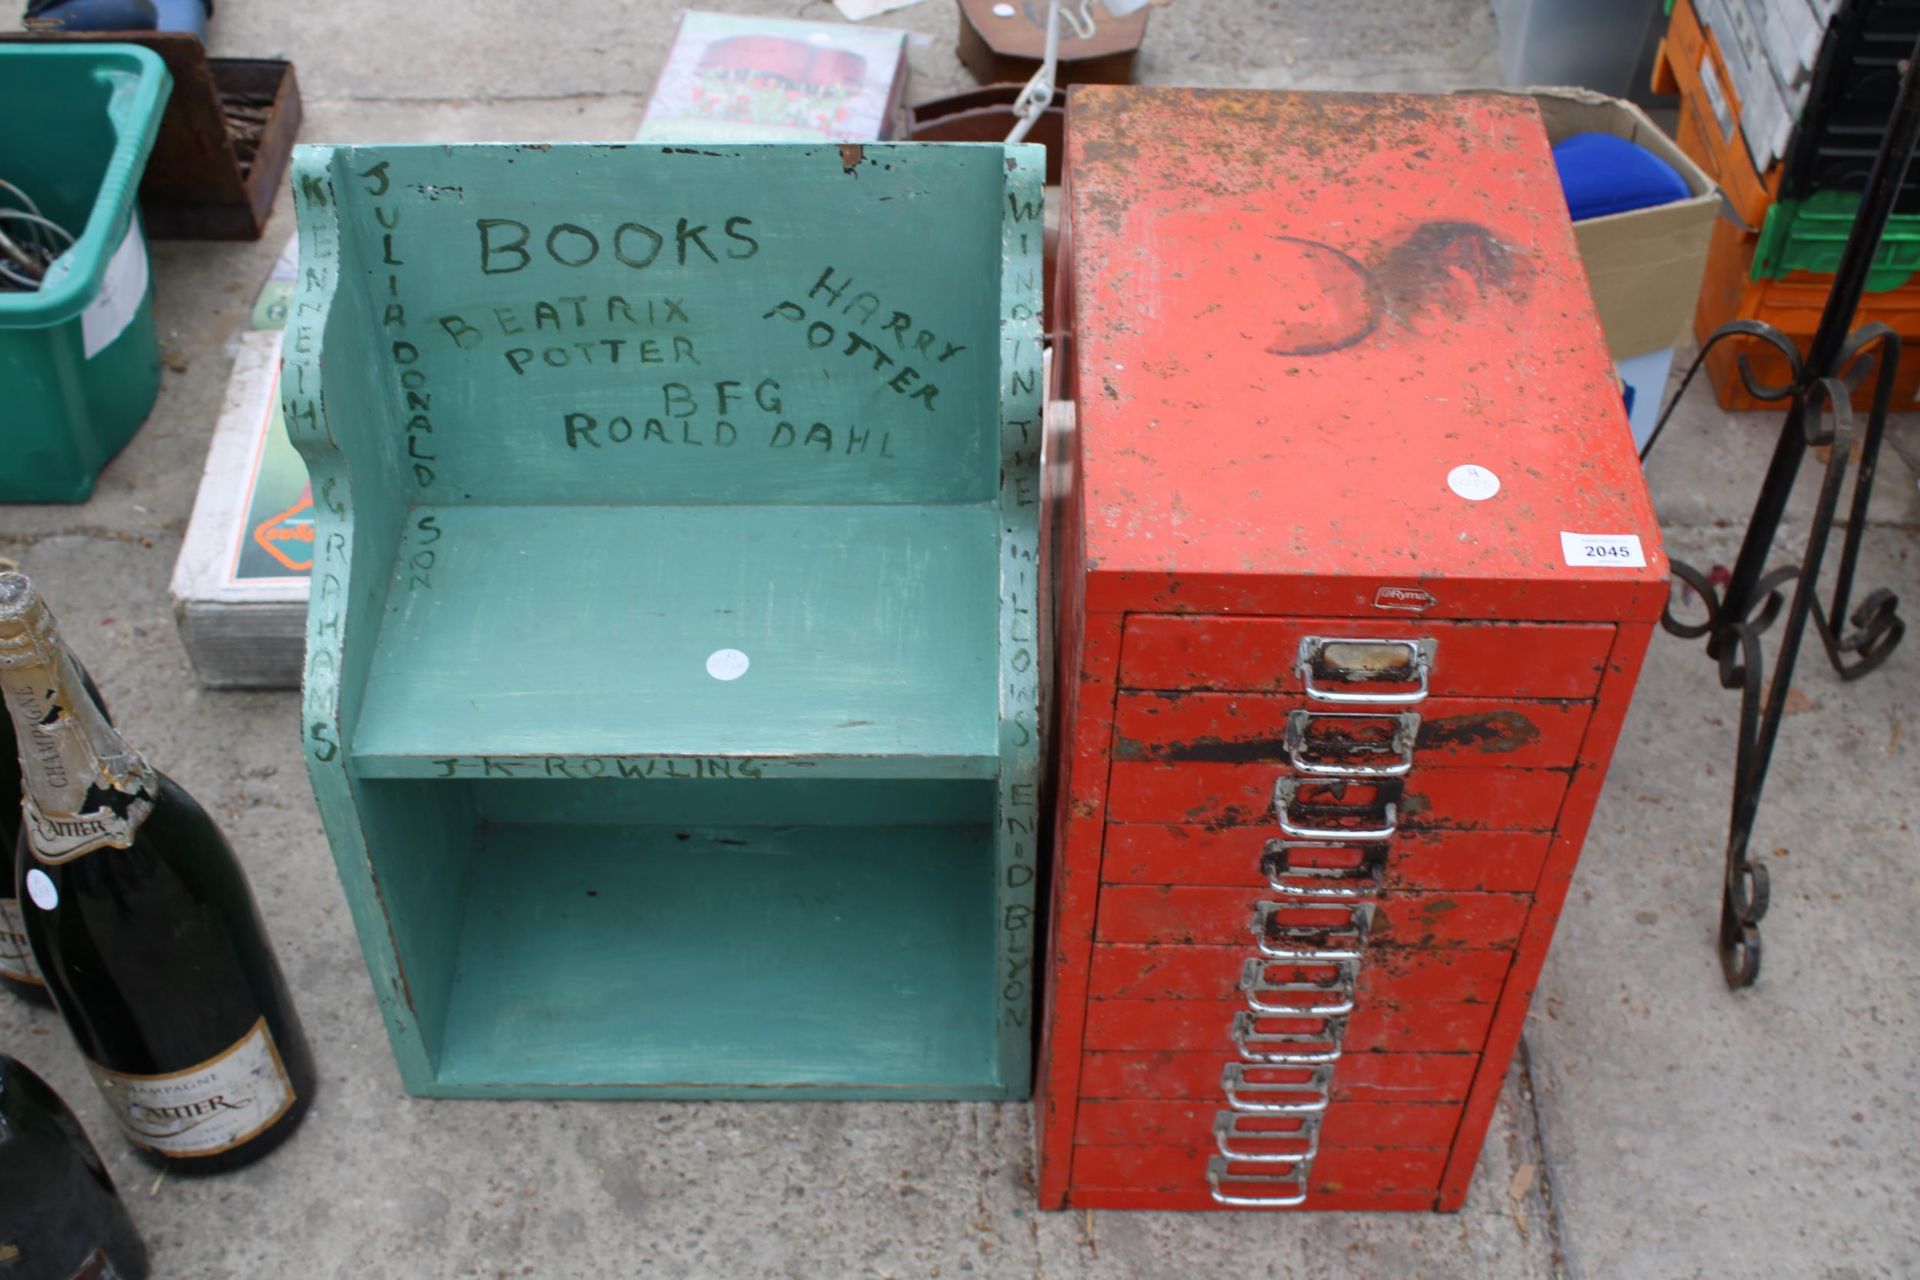 A RYMAN MINIATURE FILING CABINET AND A WOODEN BOOK SHELF